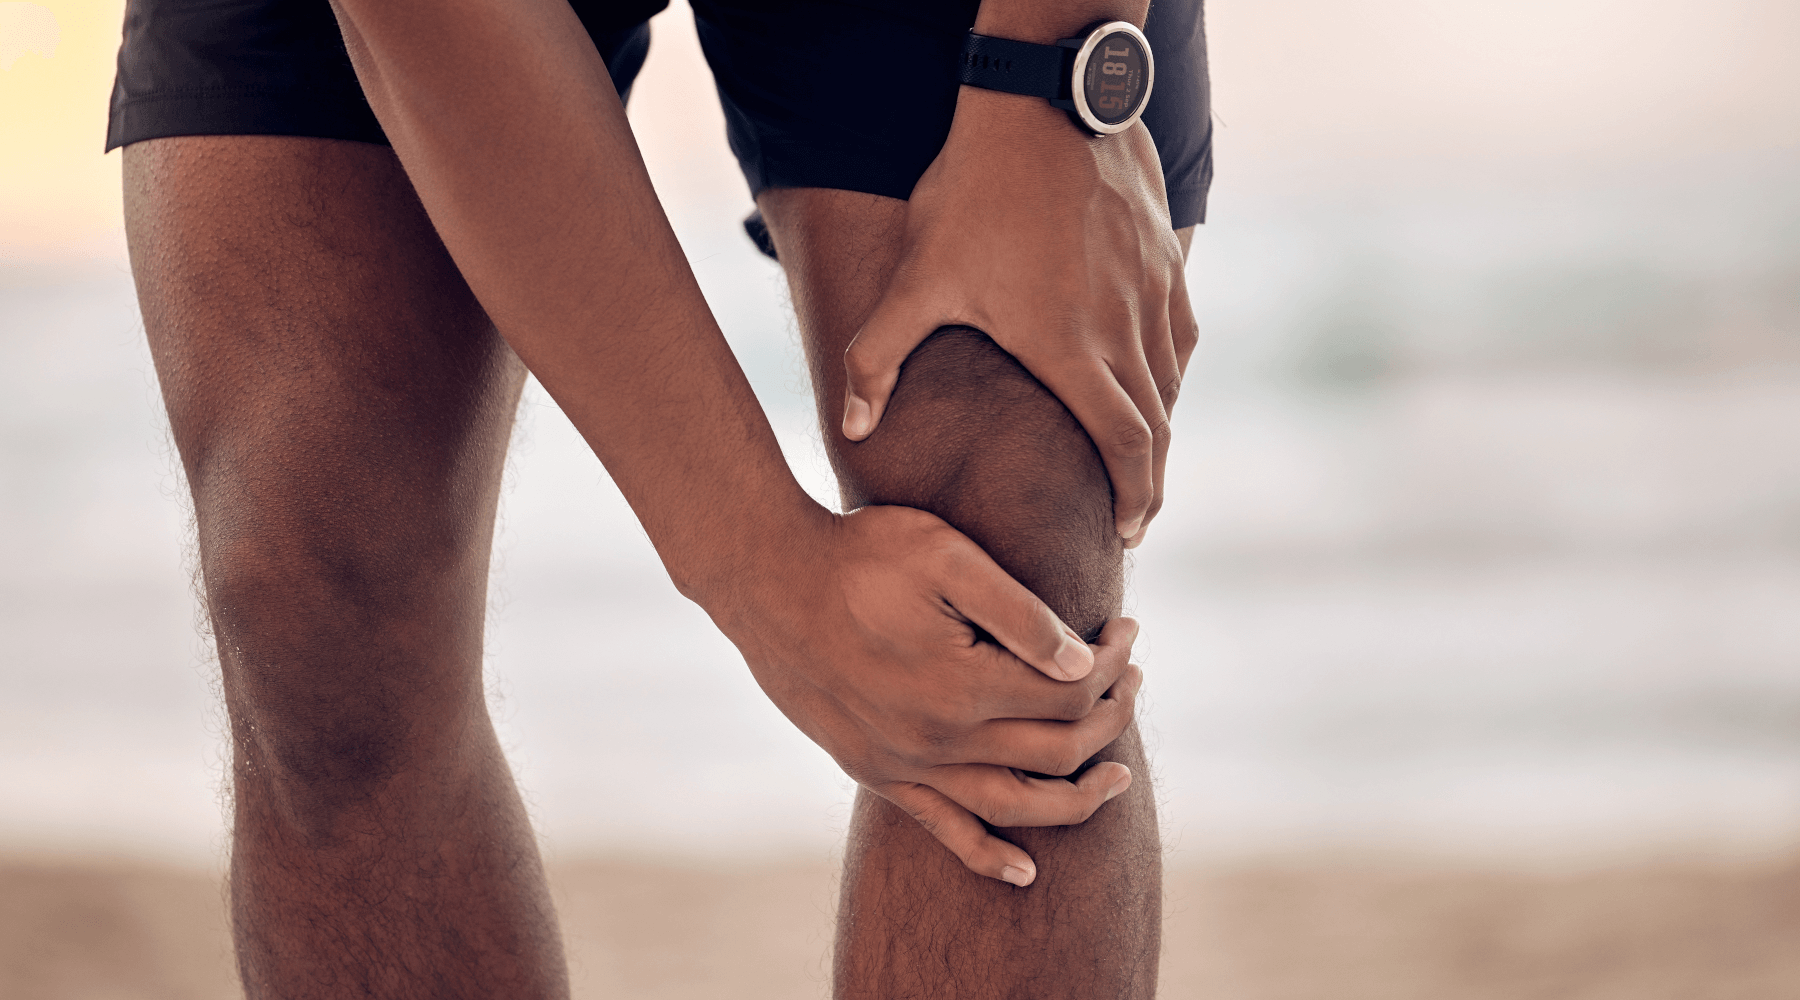 Sudden Knee Joint Pain and How to Get Knee Pain Relief without Surgery - Use Battle Balm All Natural Topical Pain Relief Today